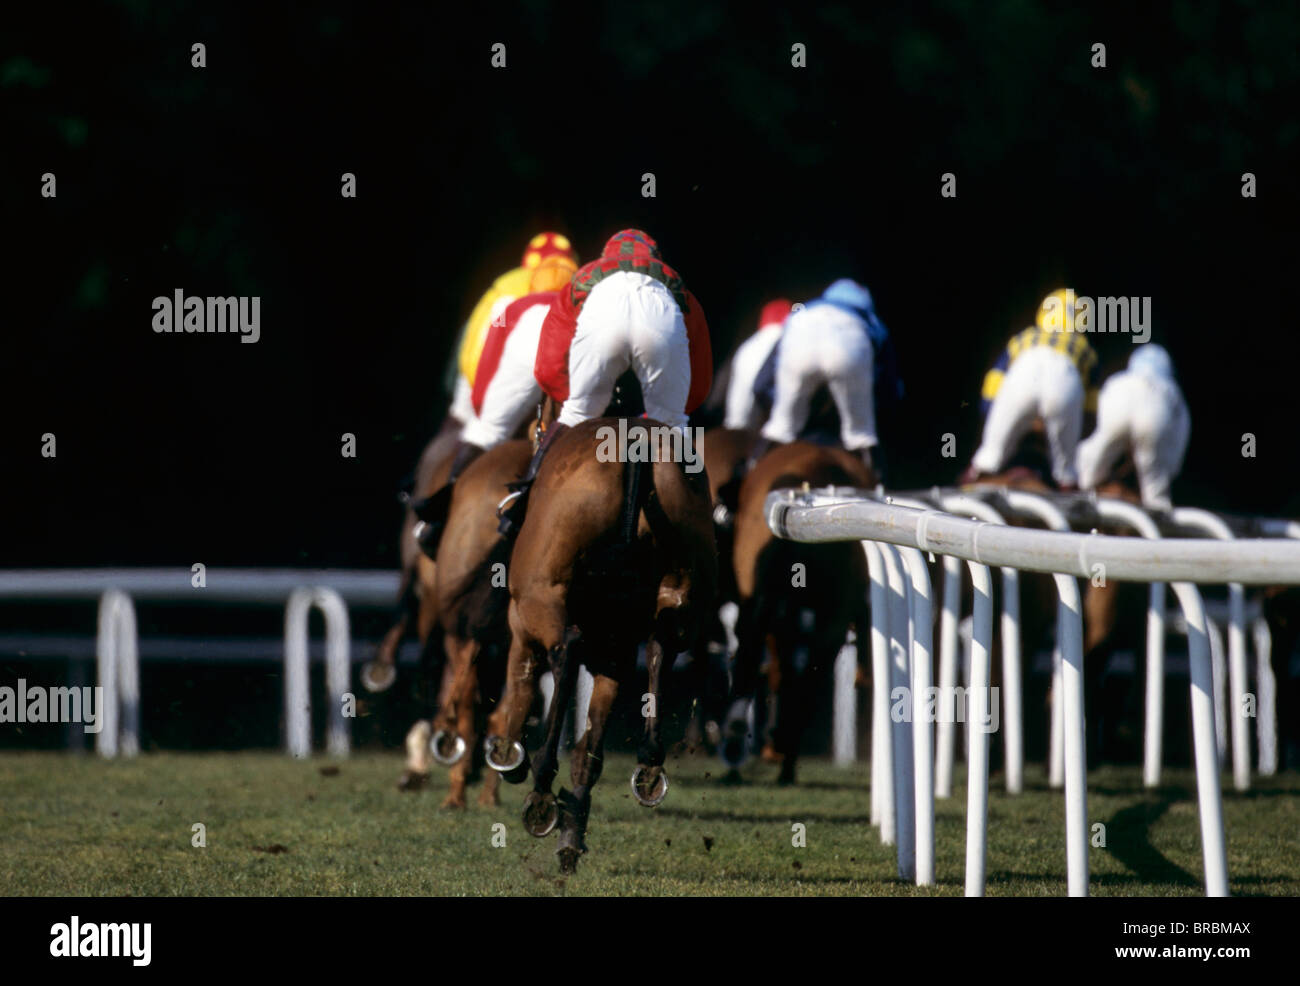 Rear view as a group of horses at race take right turn on railings Stock Photo